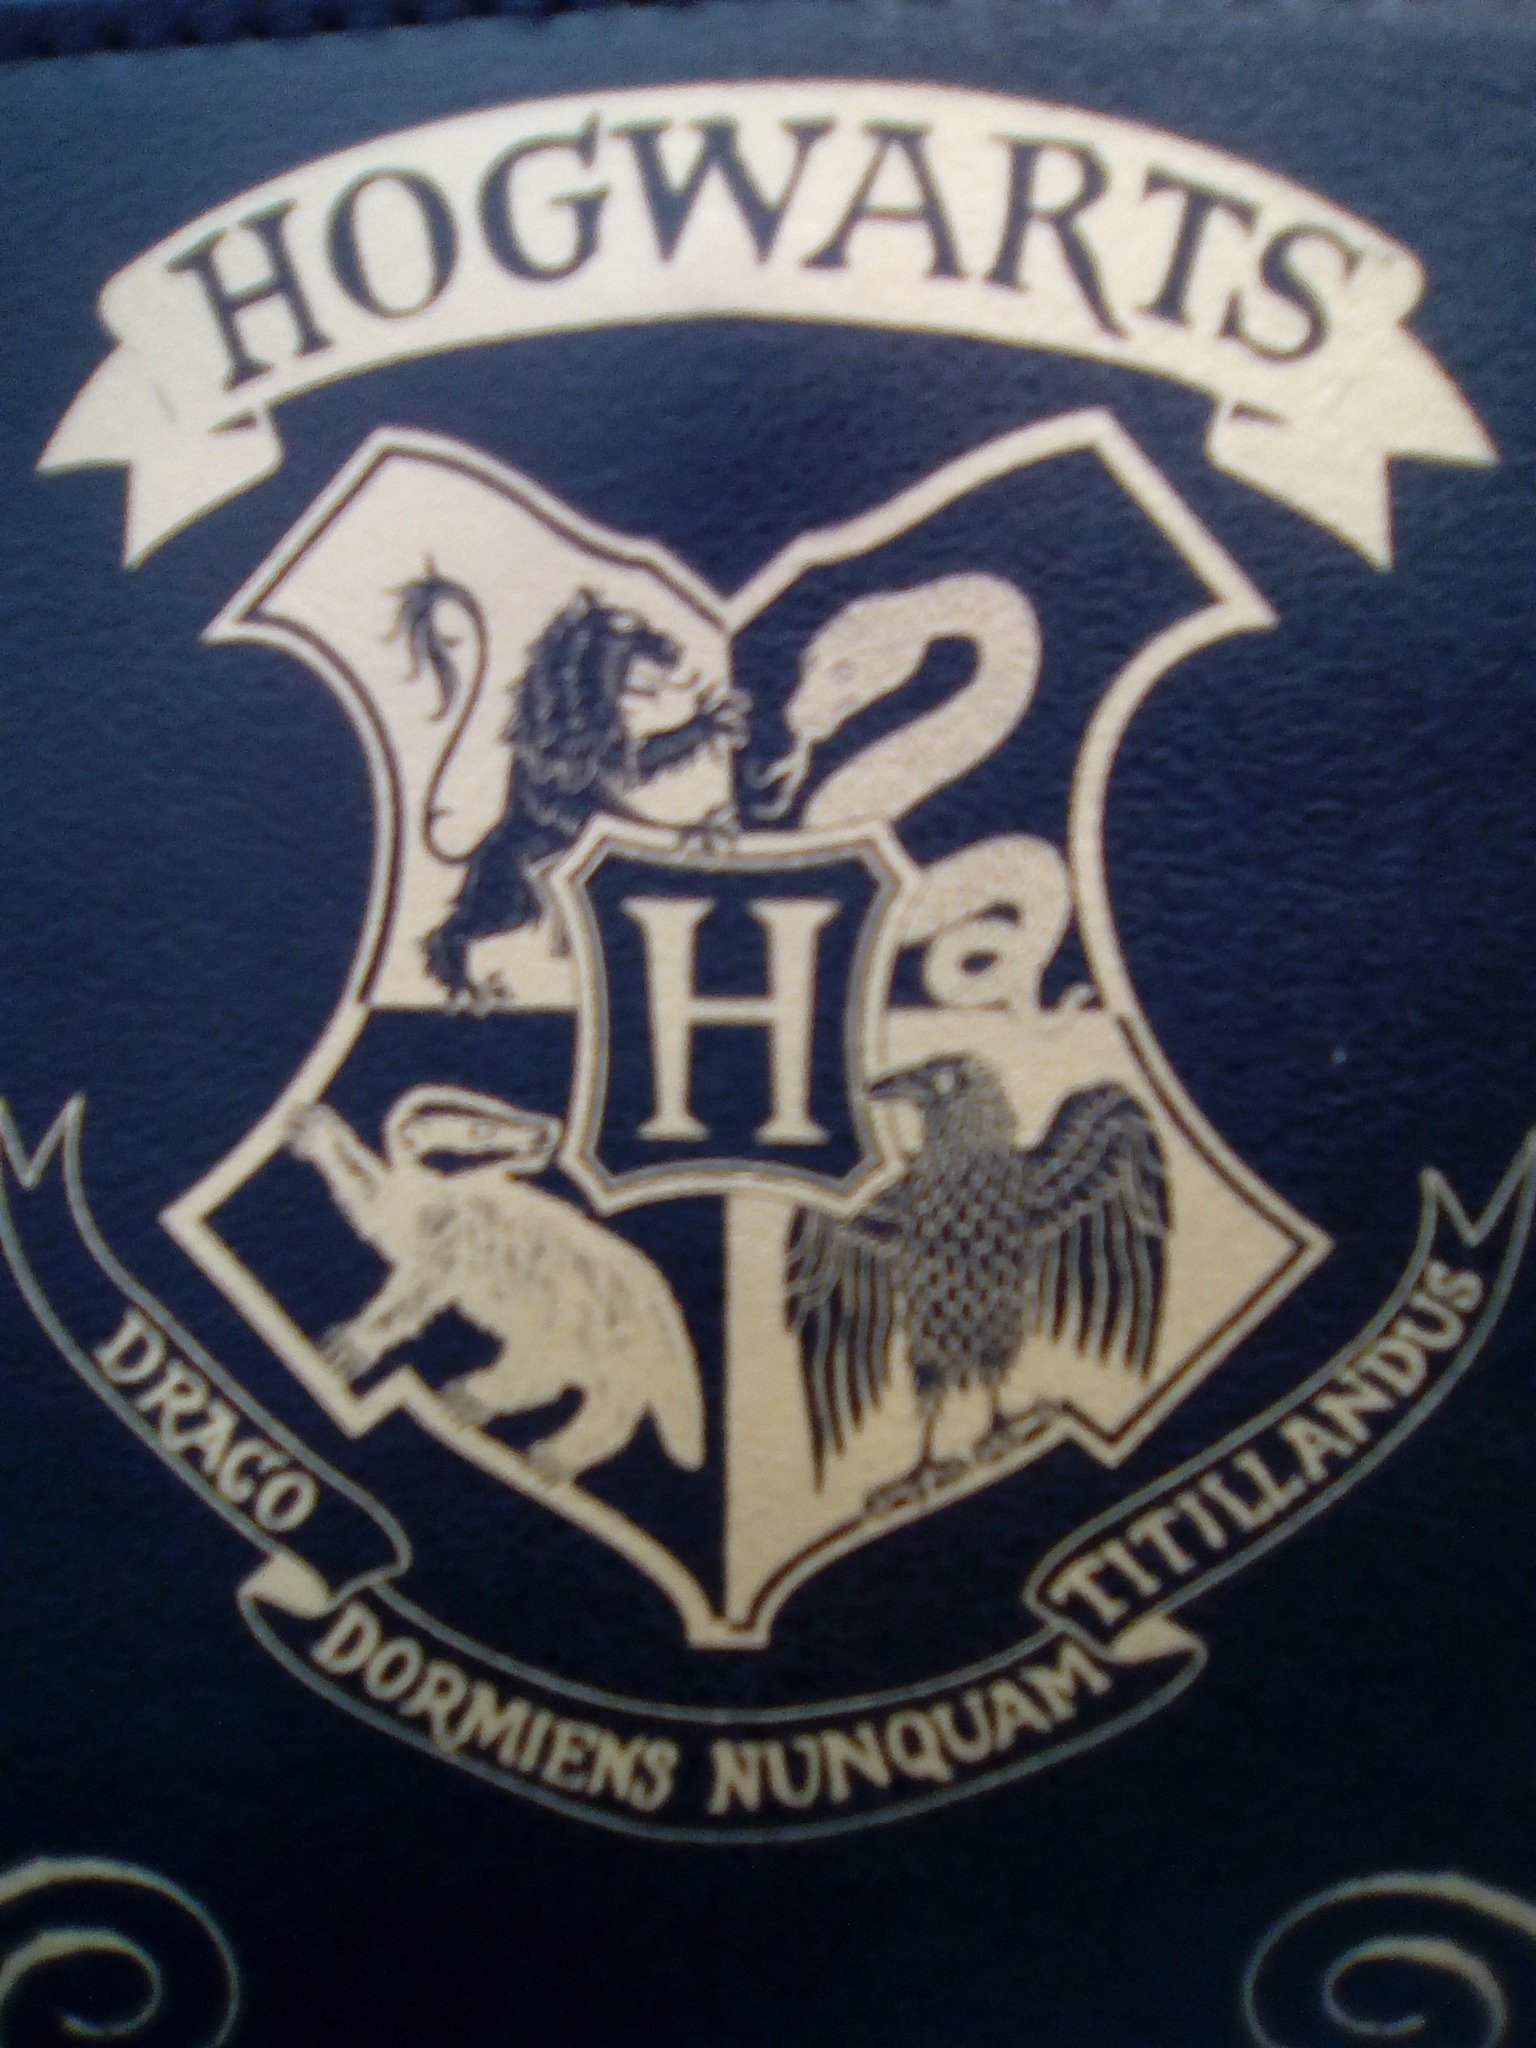 ⚡ACESSO INTERDITO A MUGGLES⚡
We are made by Hogwarts⚡💓
